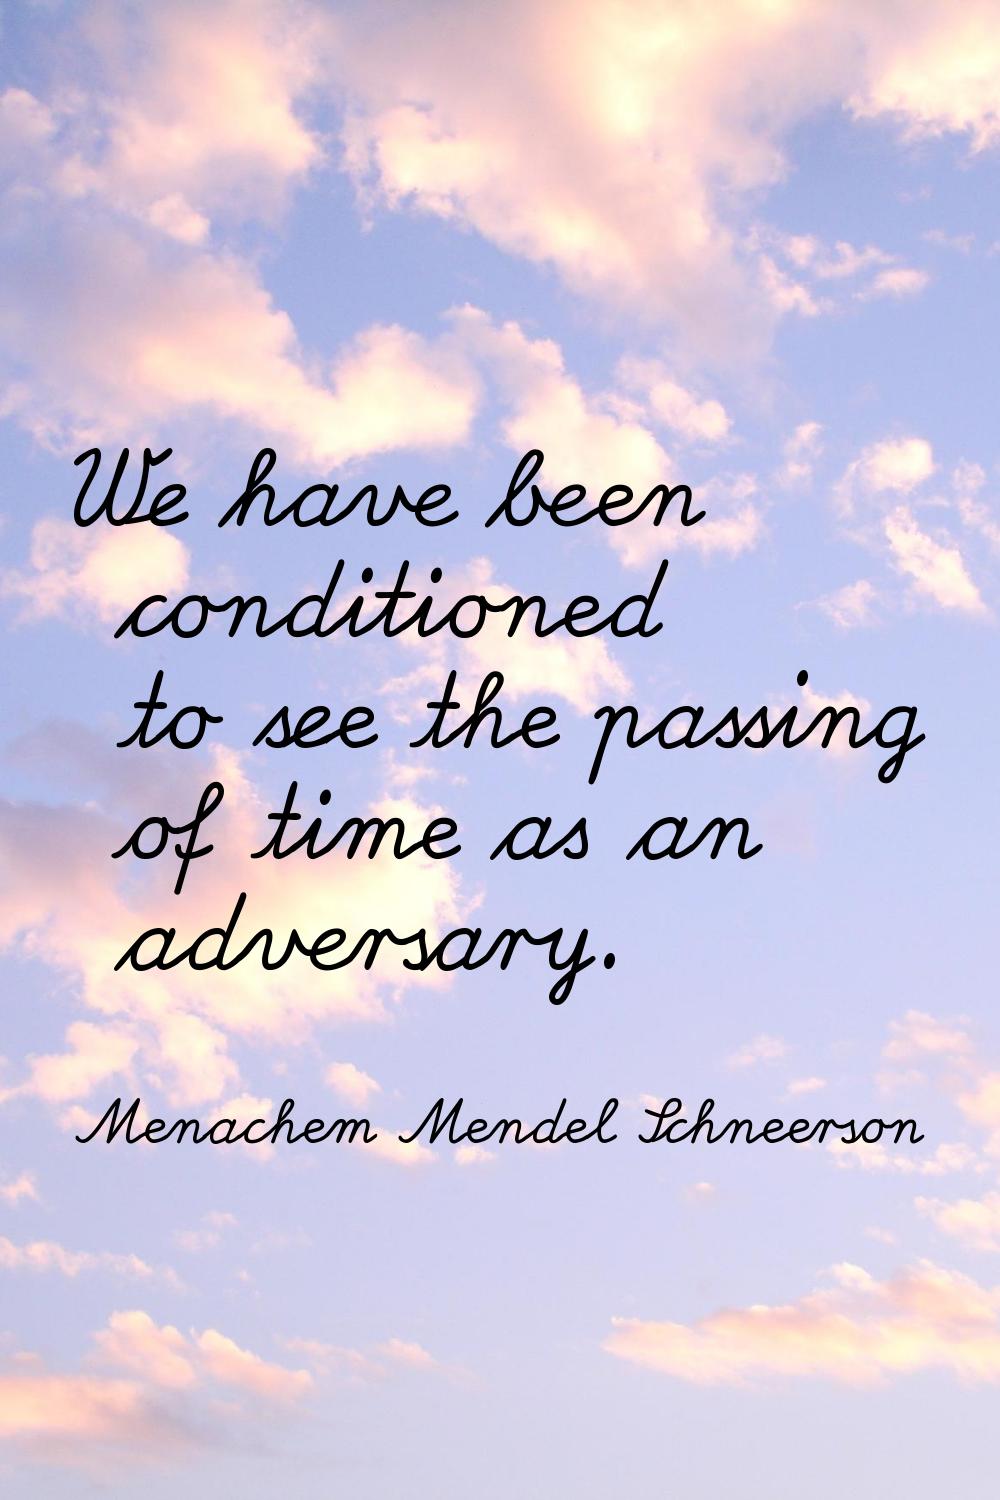 We have been conditioned to see the passing of time as an adversary.